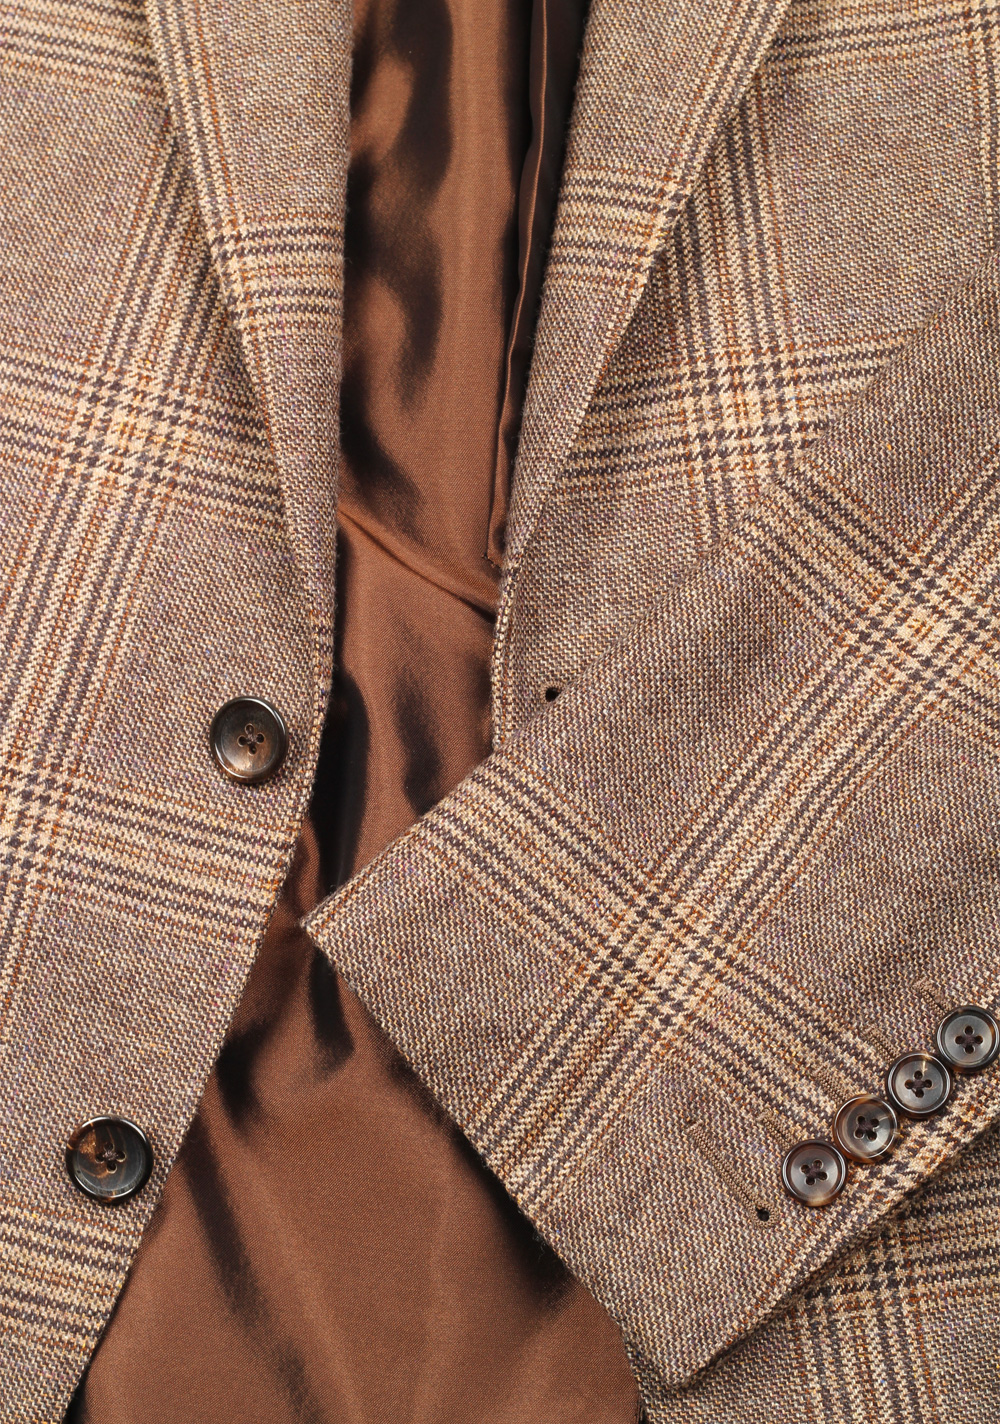 TOM FORD O’Connor Checked Brown Sport Coat Size 46 / 36R In Wool Silk | Costume Limité